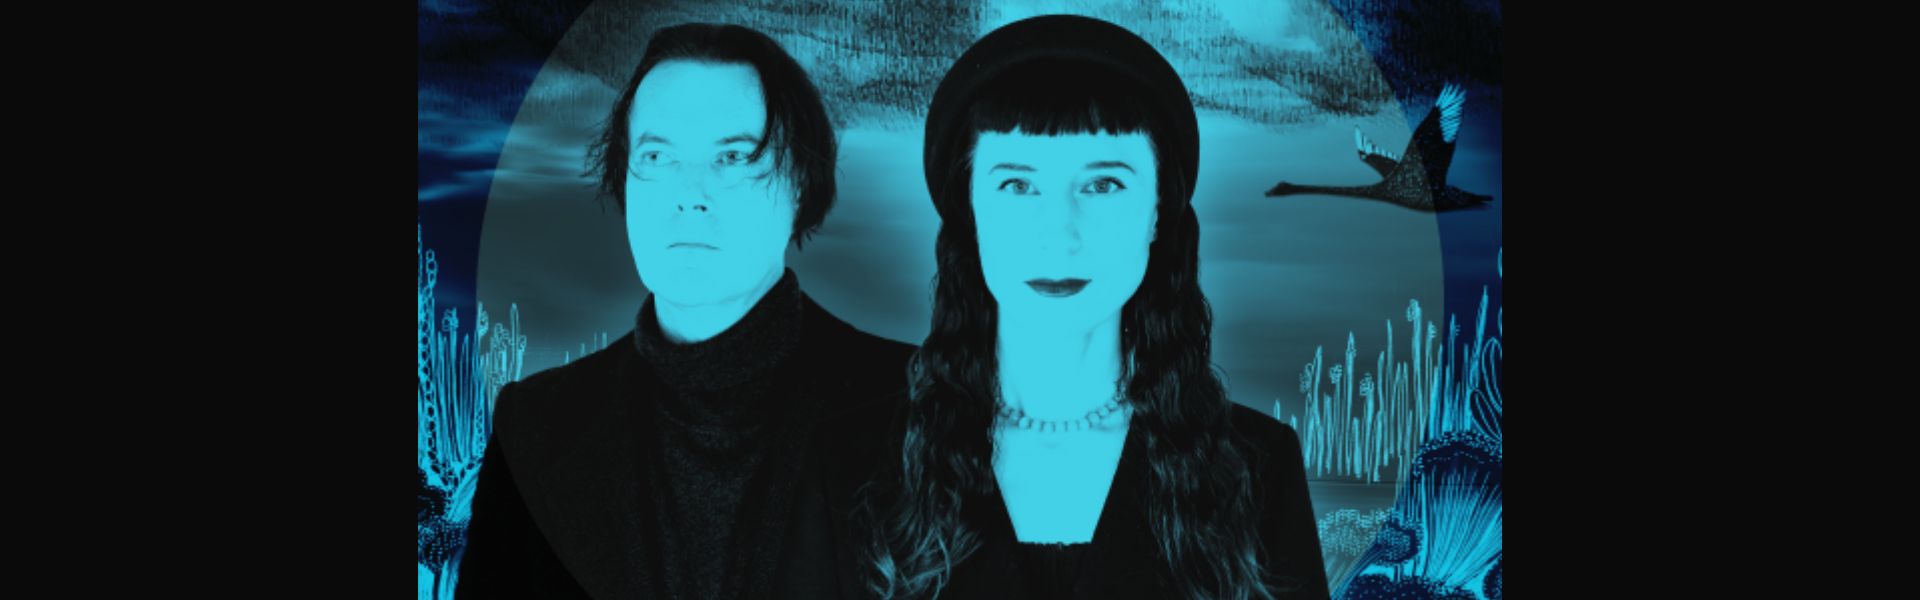 A man with short dark hair and a woman with long dark hair wear dark outfits. They stand side by side in front a forested backdrop. A blue hue is overlaid on the image.